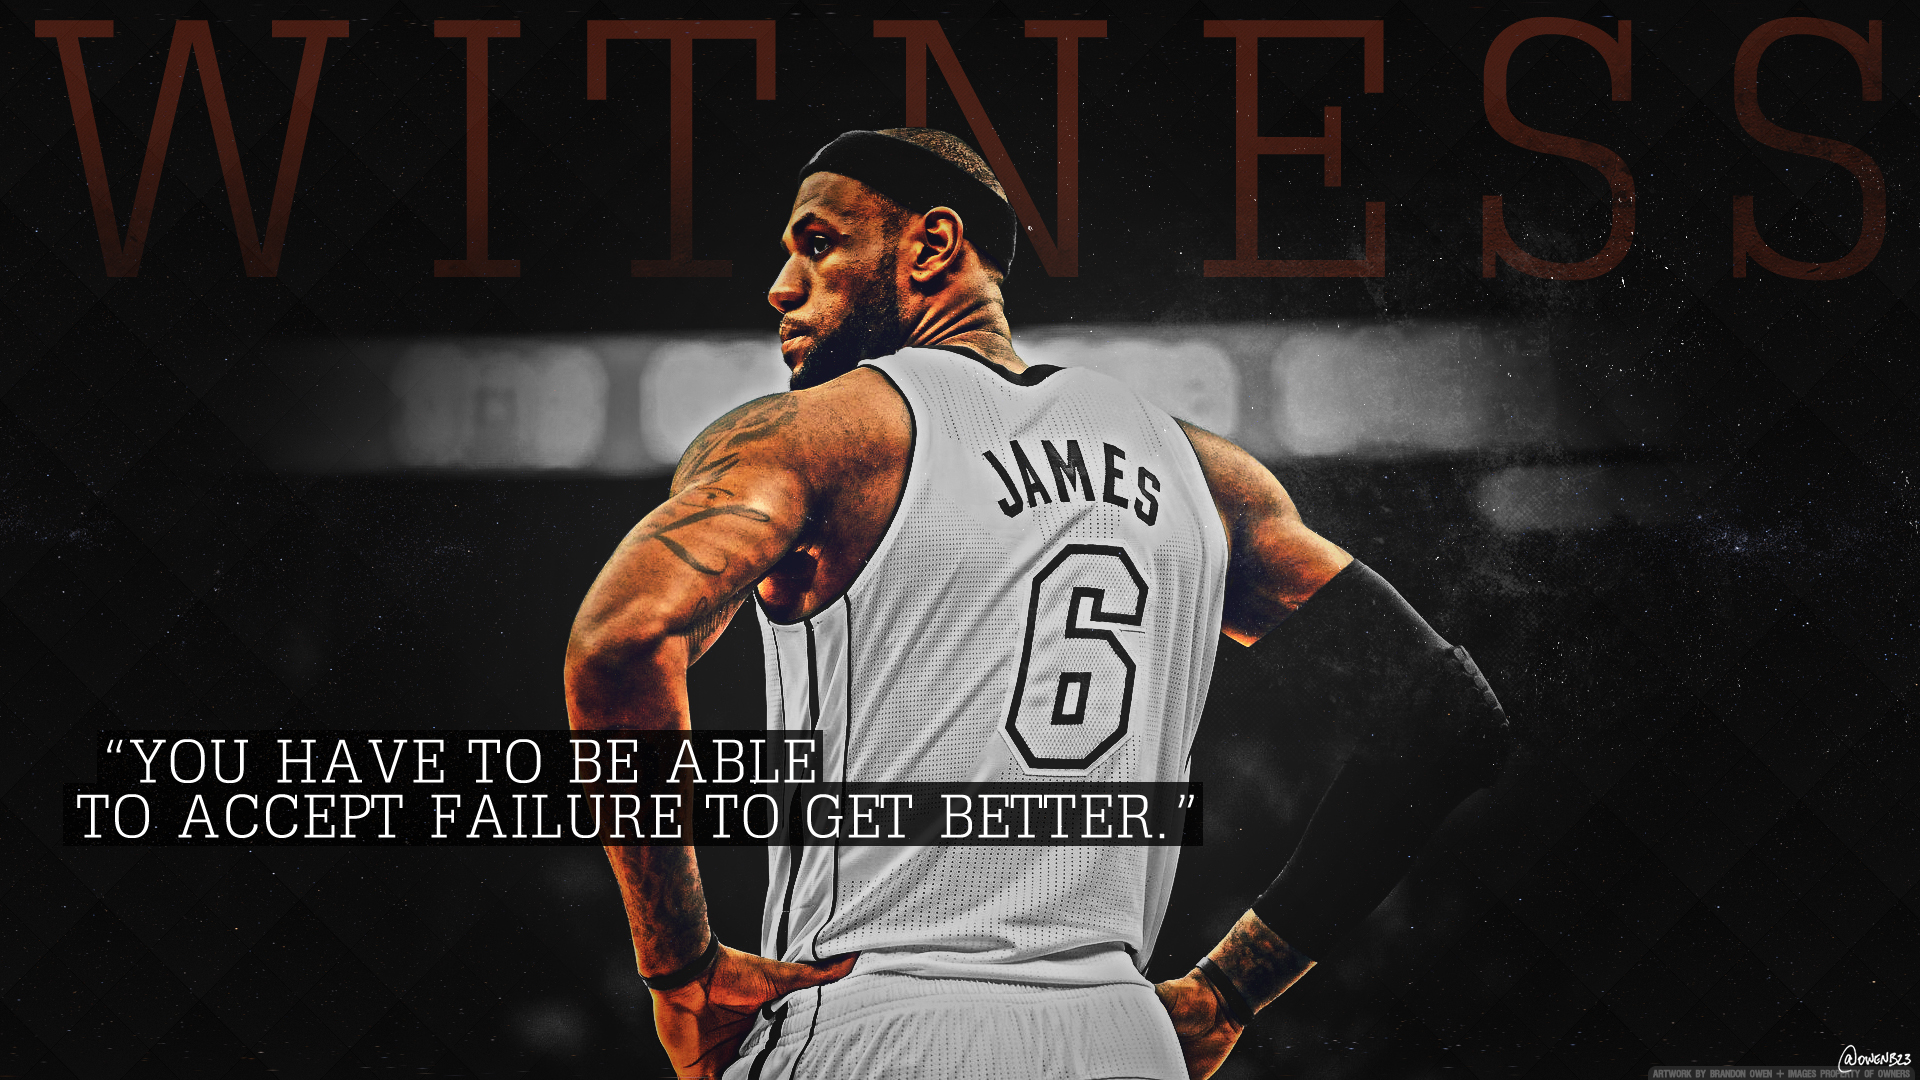 25 Energetic Basketball Quotes1920 x 1080